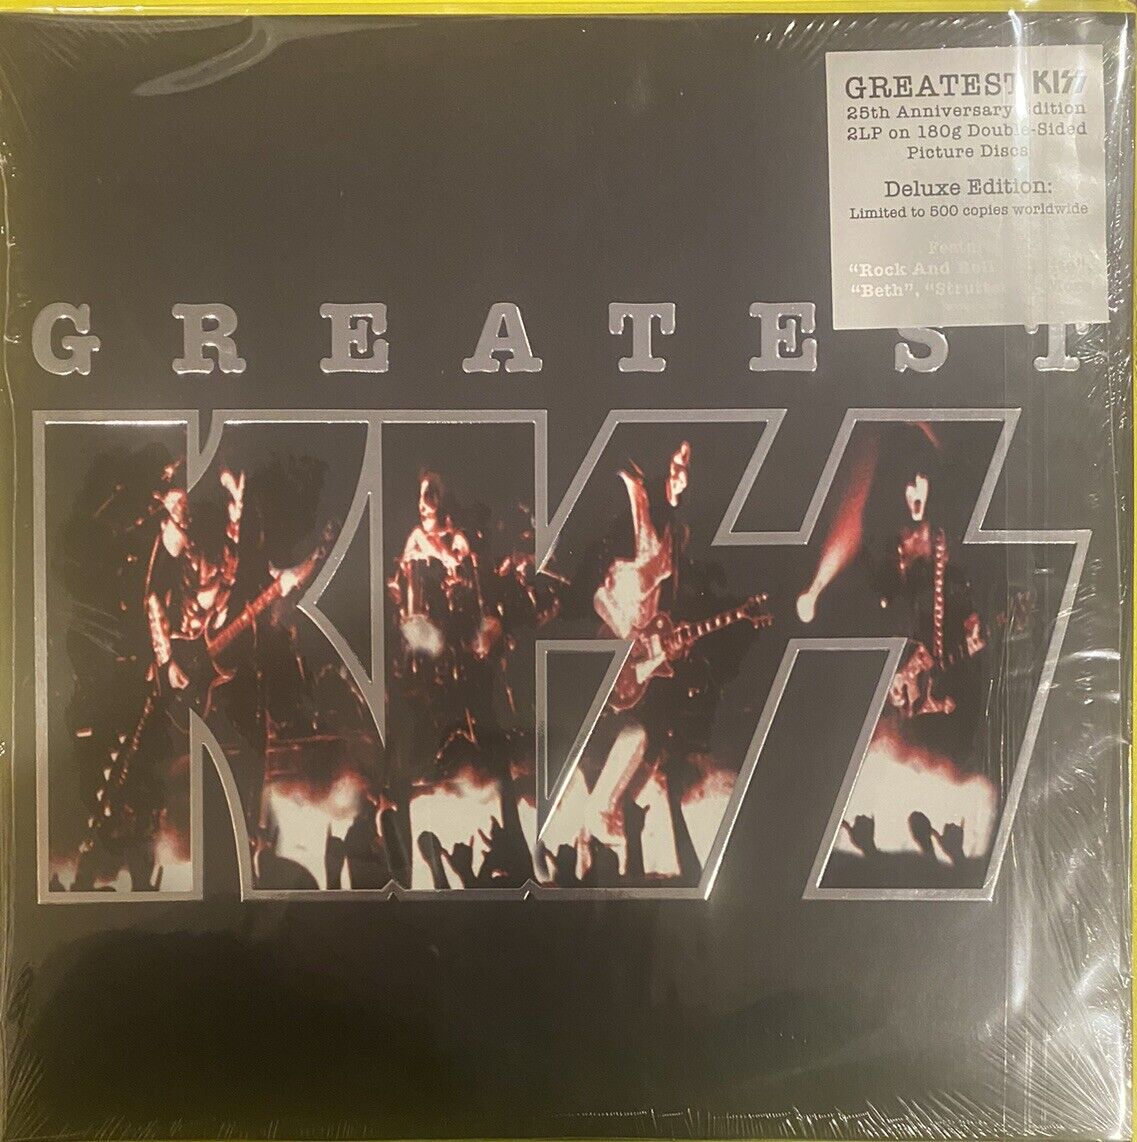 KISS Greatest Kiss 2 LP vinyl picture disc set - limited to 500 Sealed. Mint